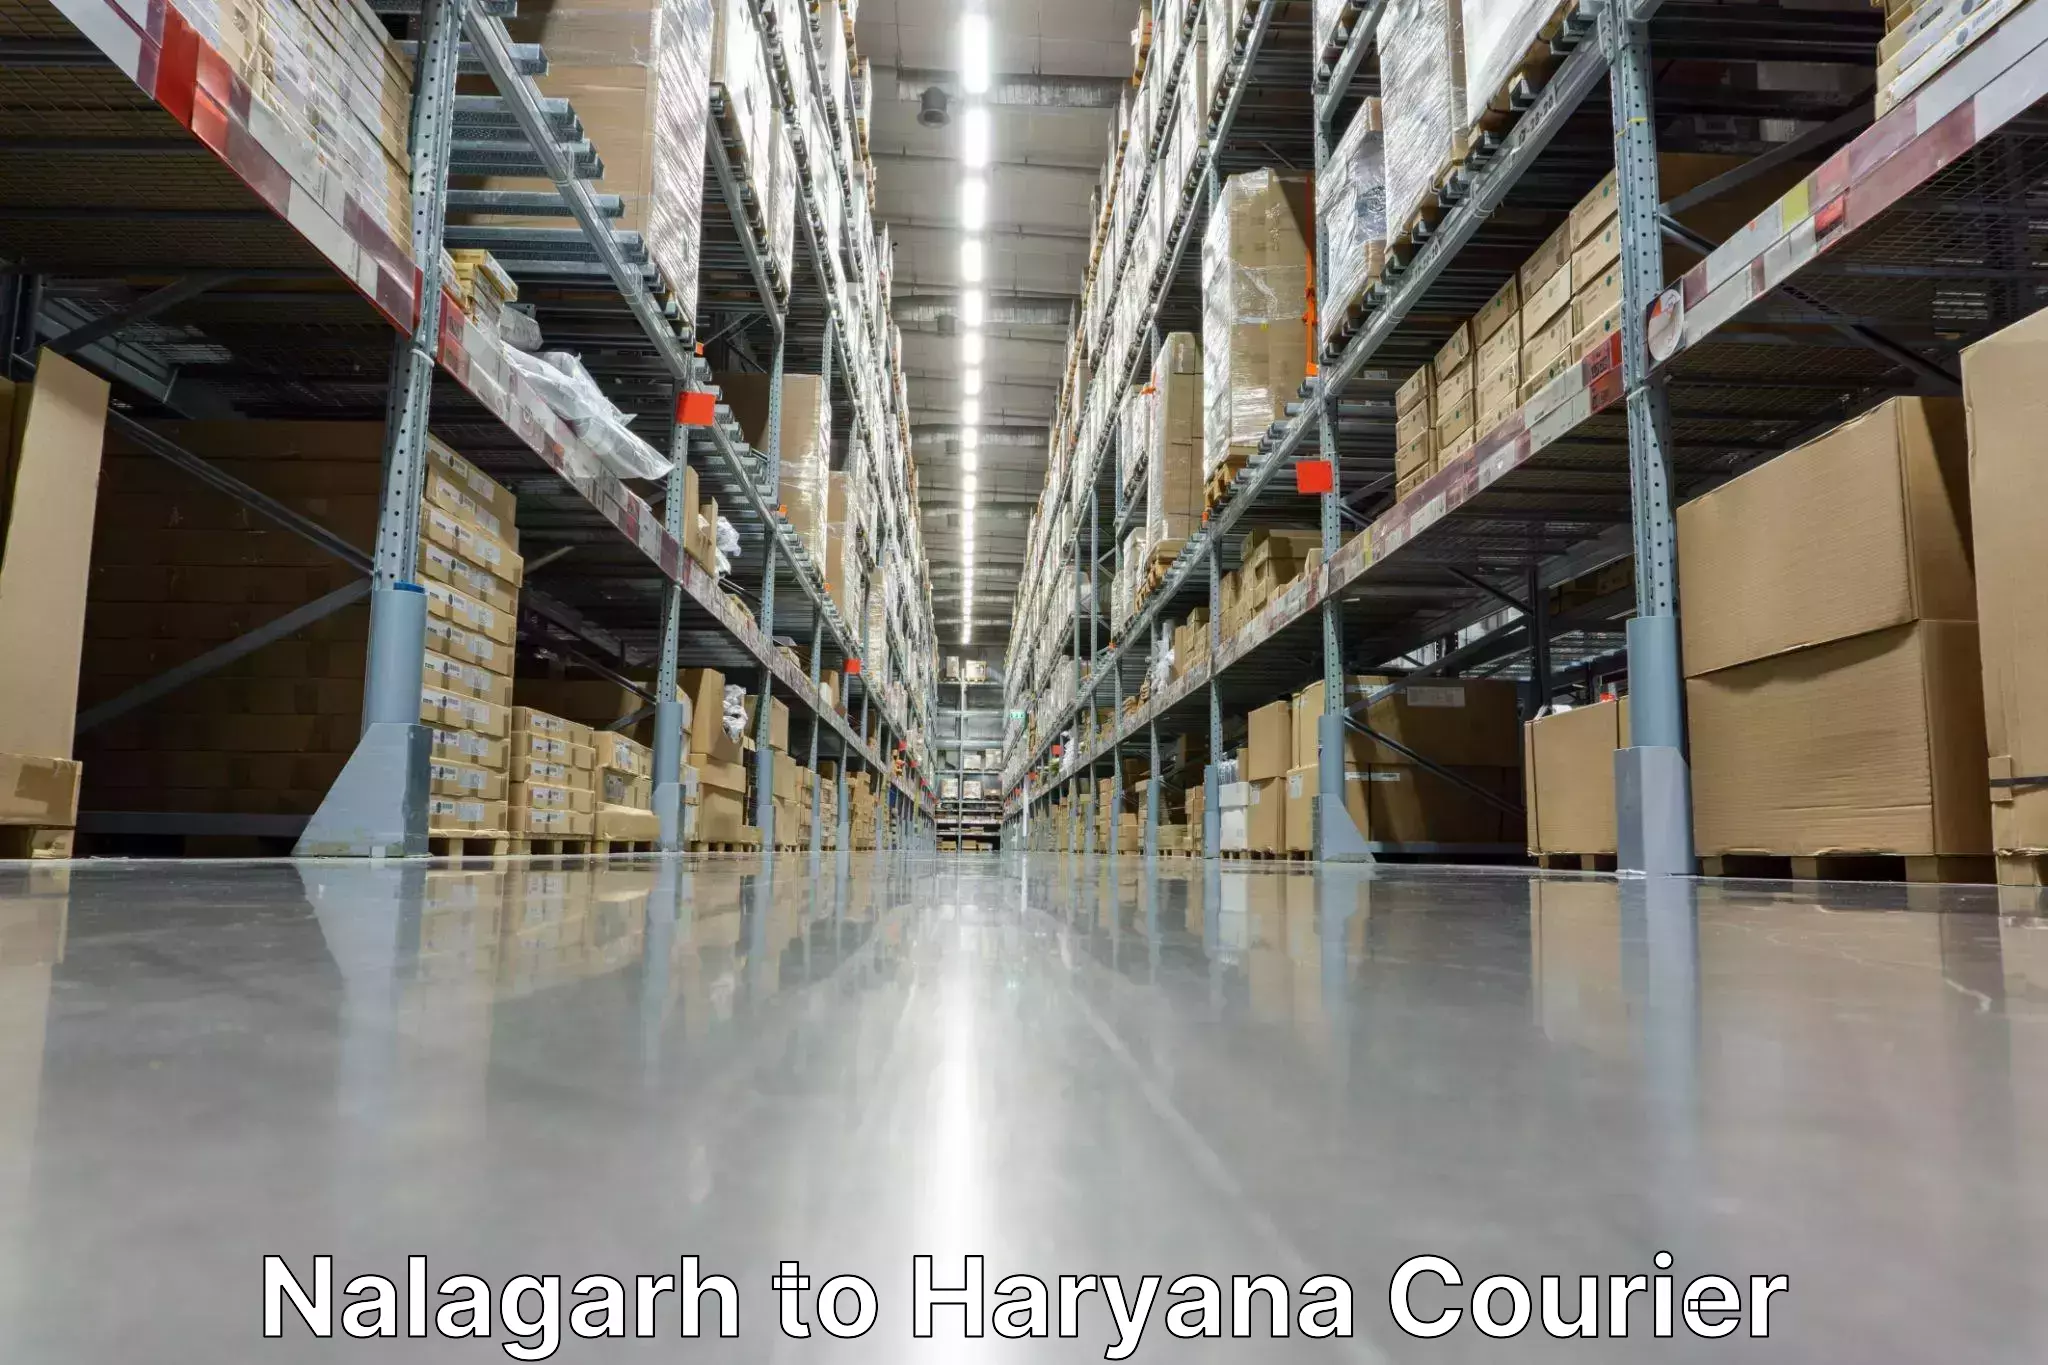 Bulk courier orders in Nalagarh to Chaudhary Charan Singh Haryana Agricultural University Hisar